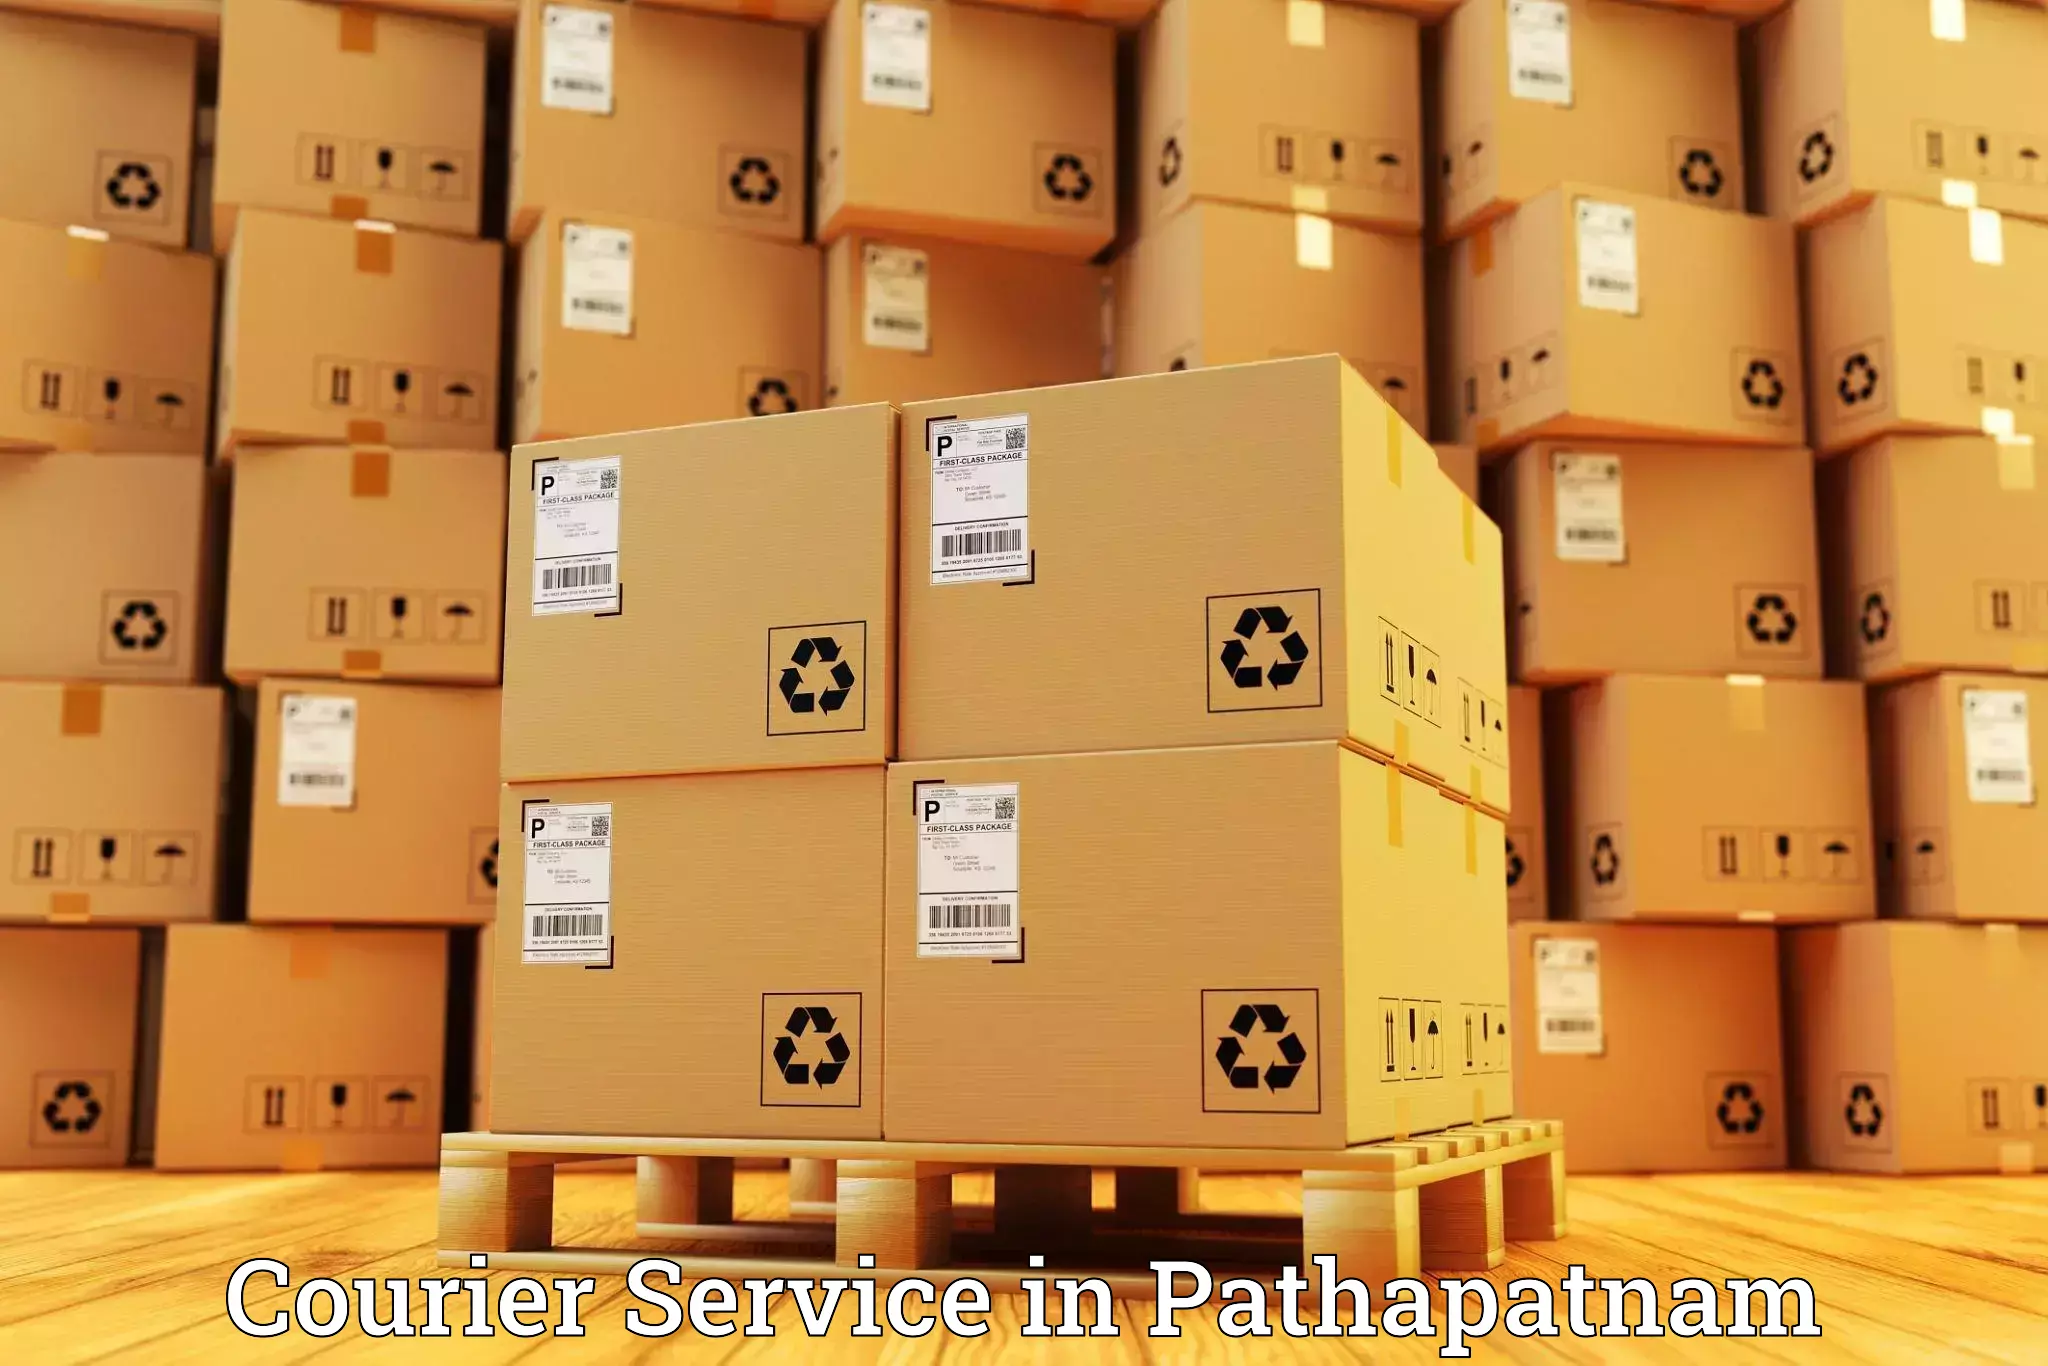 Efficient order fulfillment in Pathapatnam